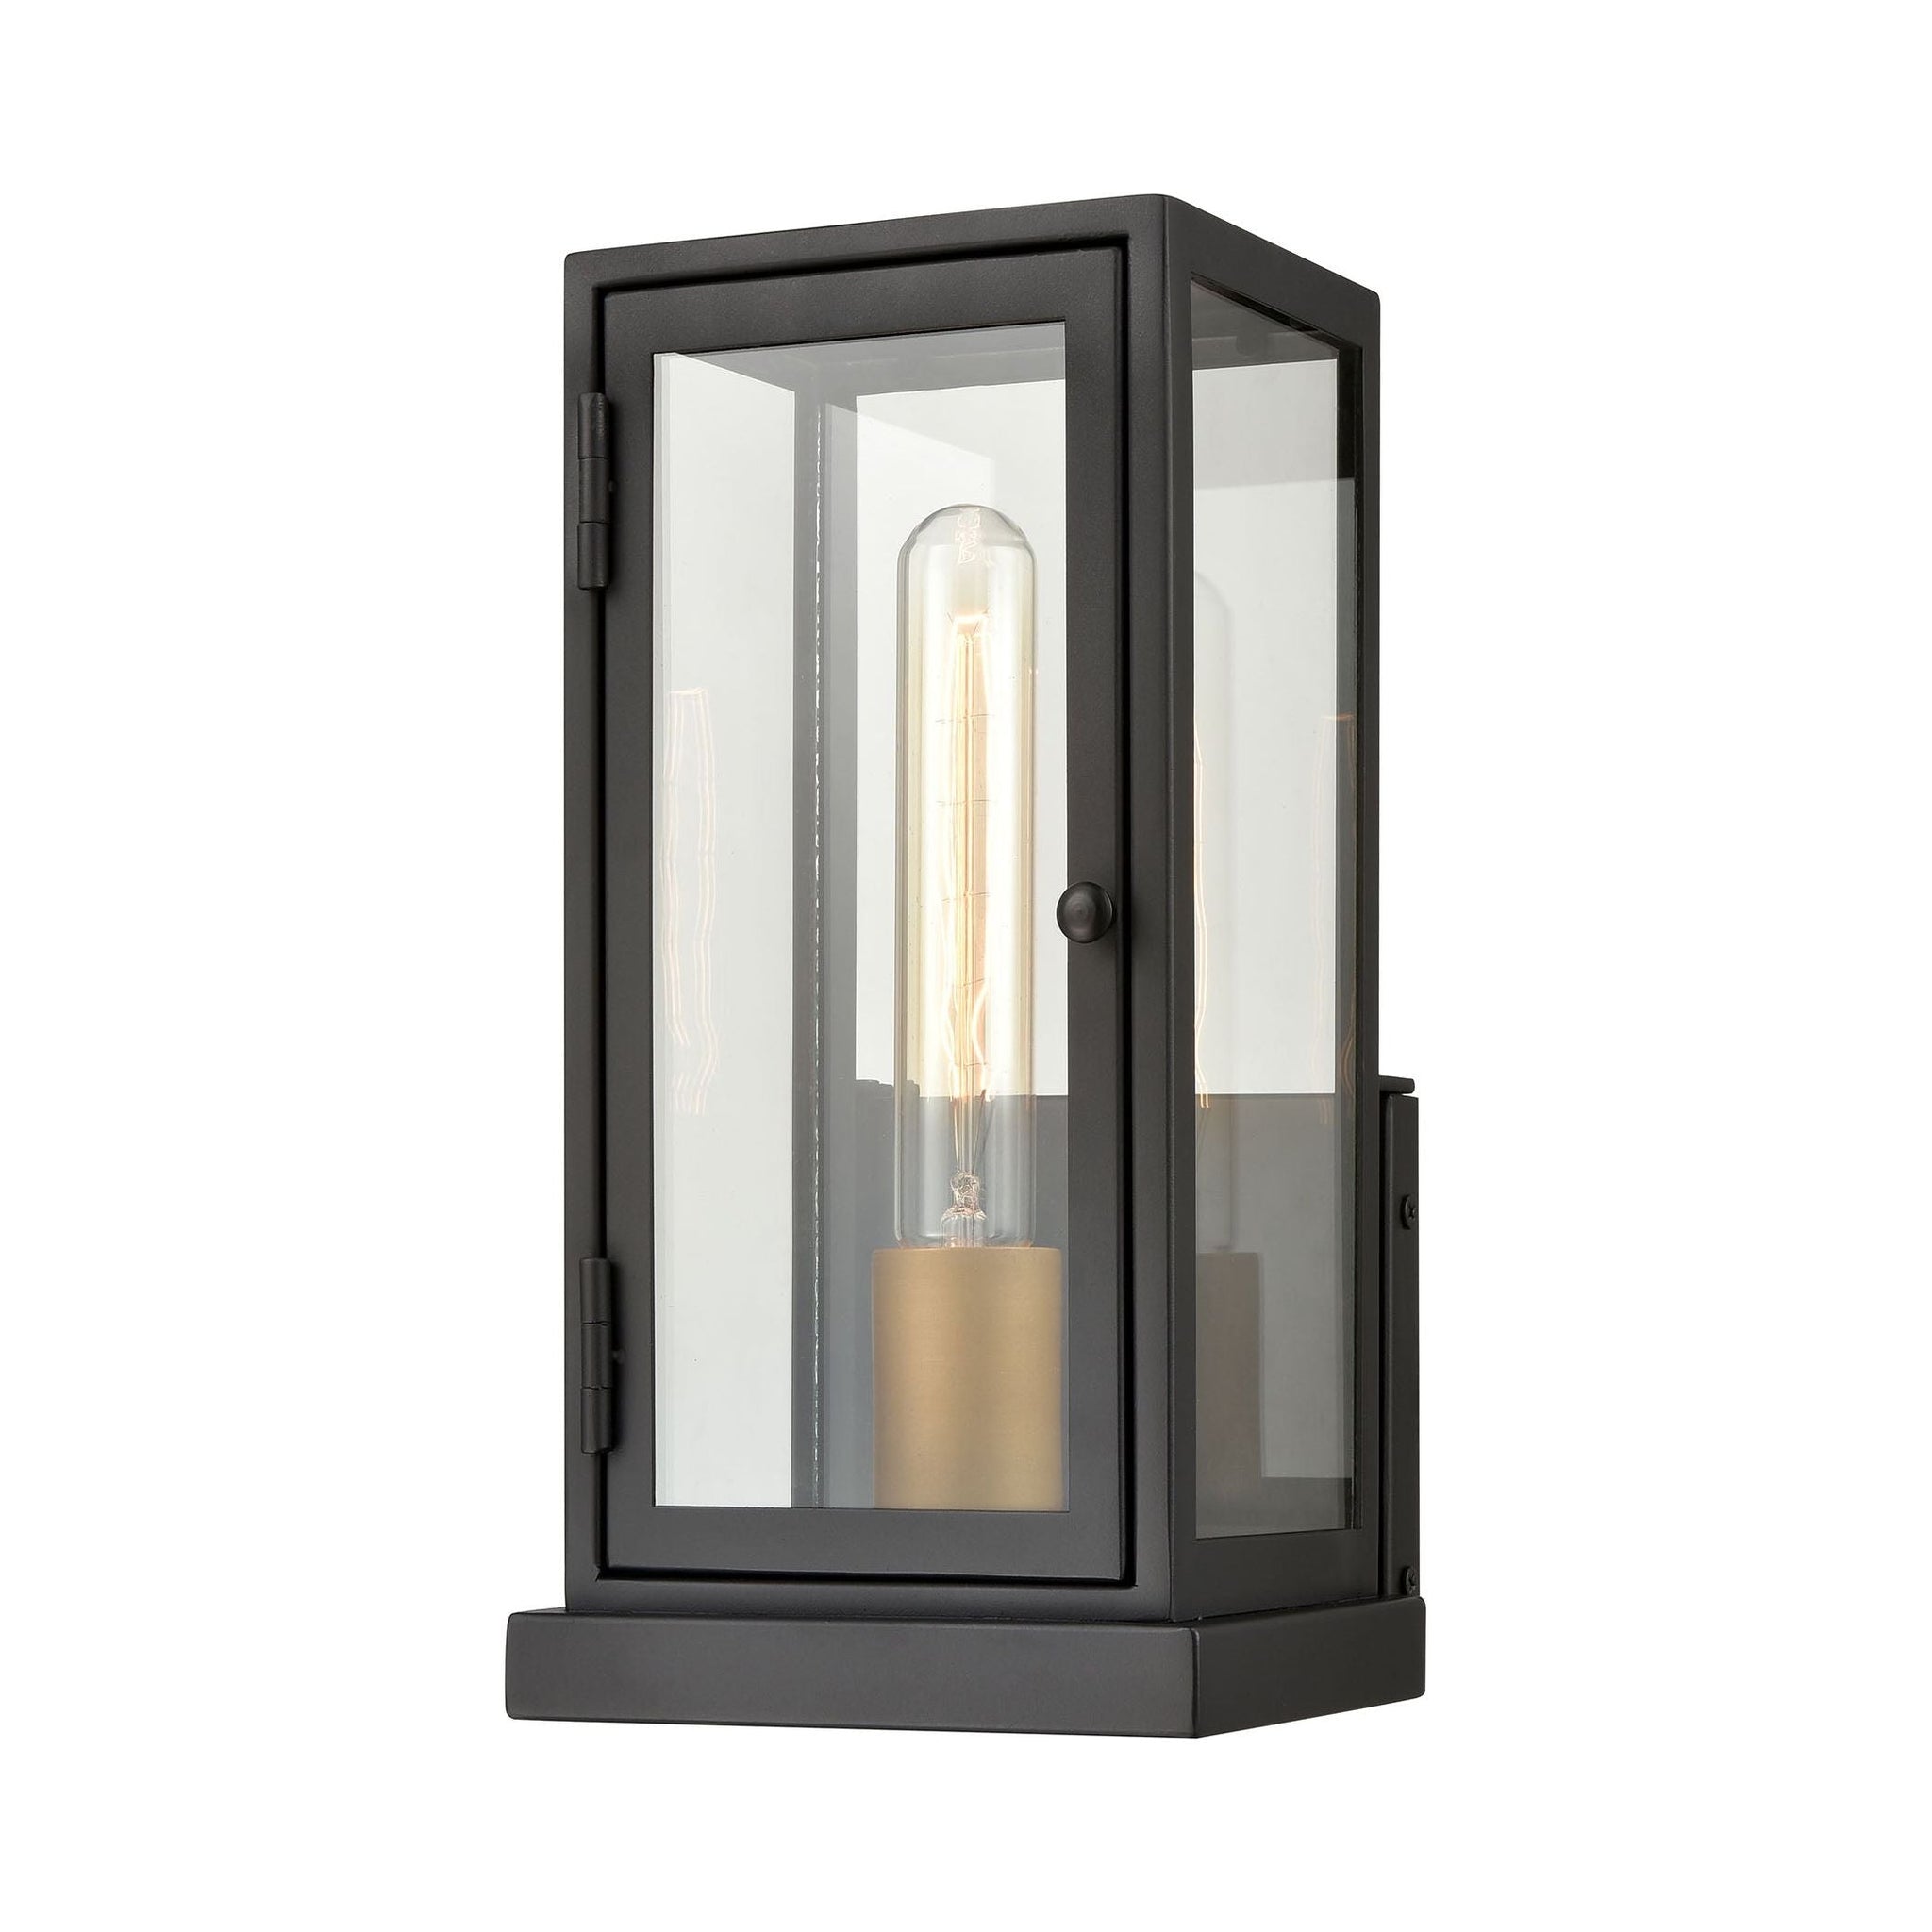 Foundation 12" High 1-Light Outdoor Sconce